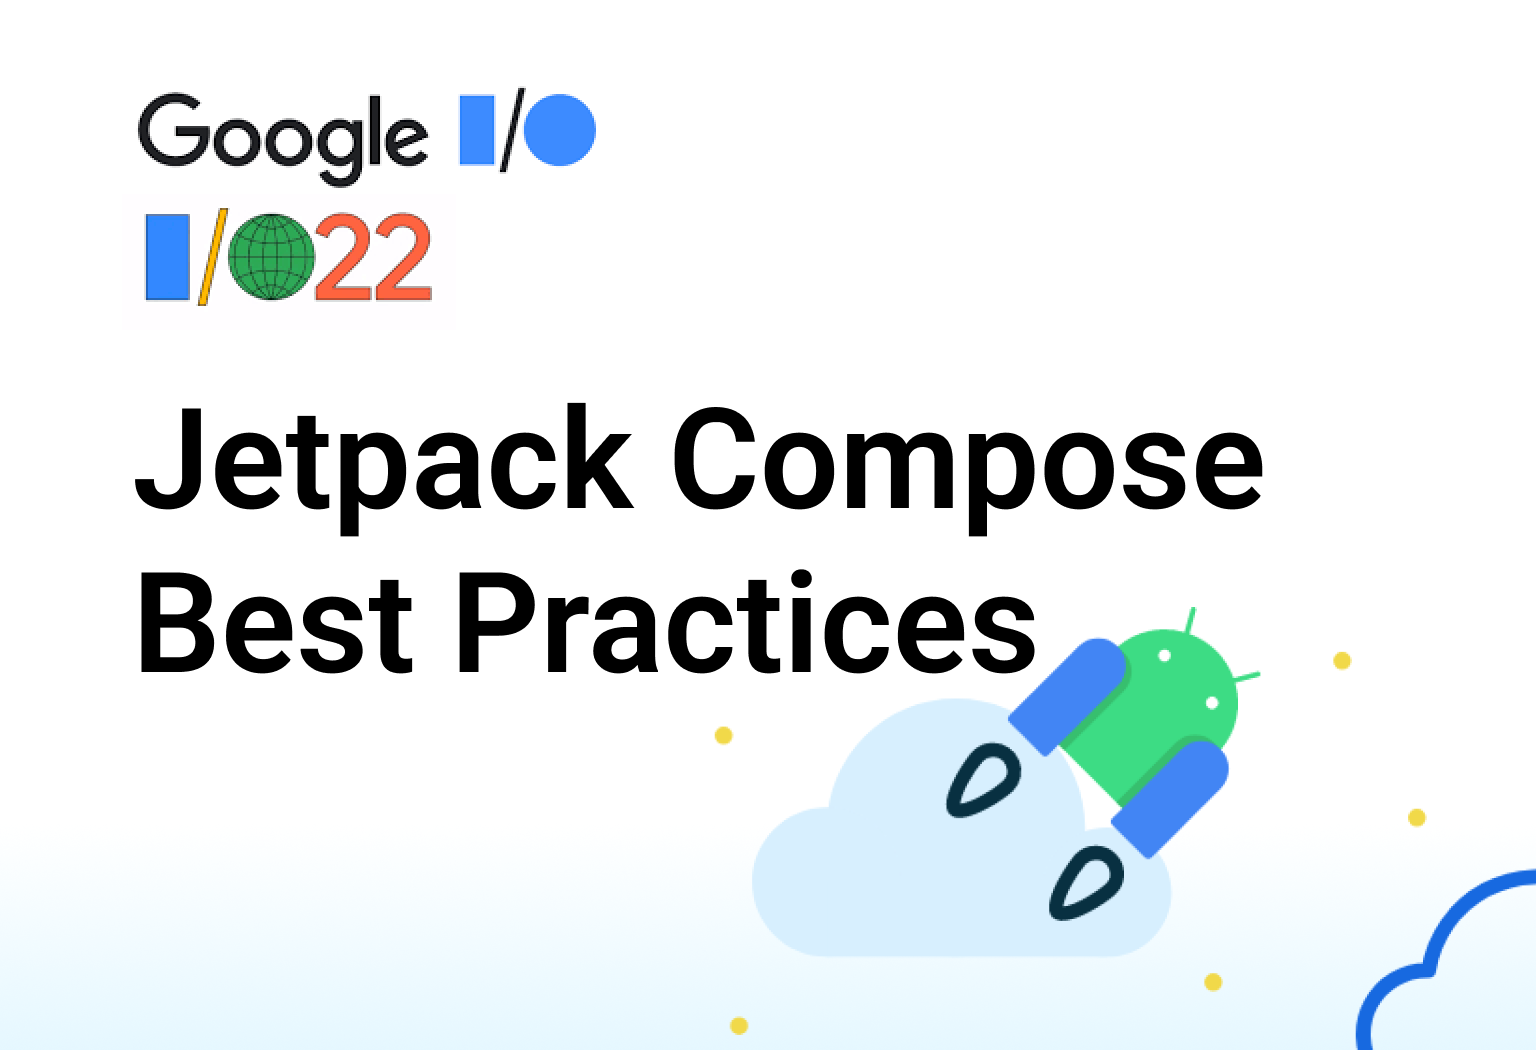 Android Developers Blog: What's new in Jetpack Compose